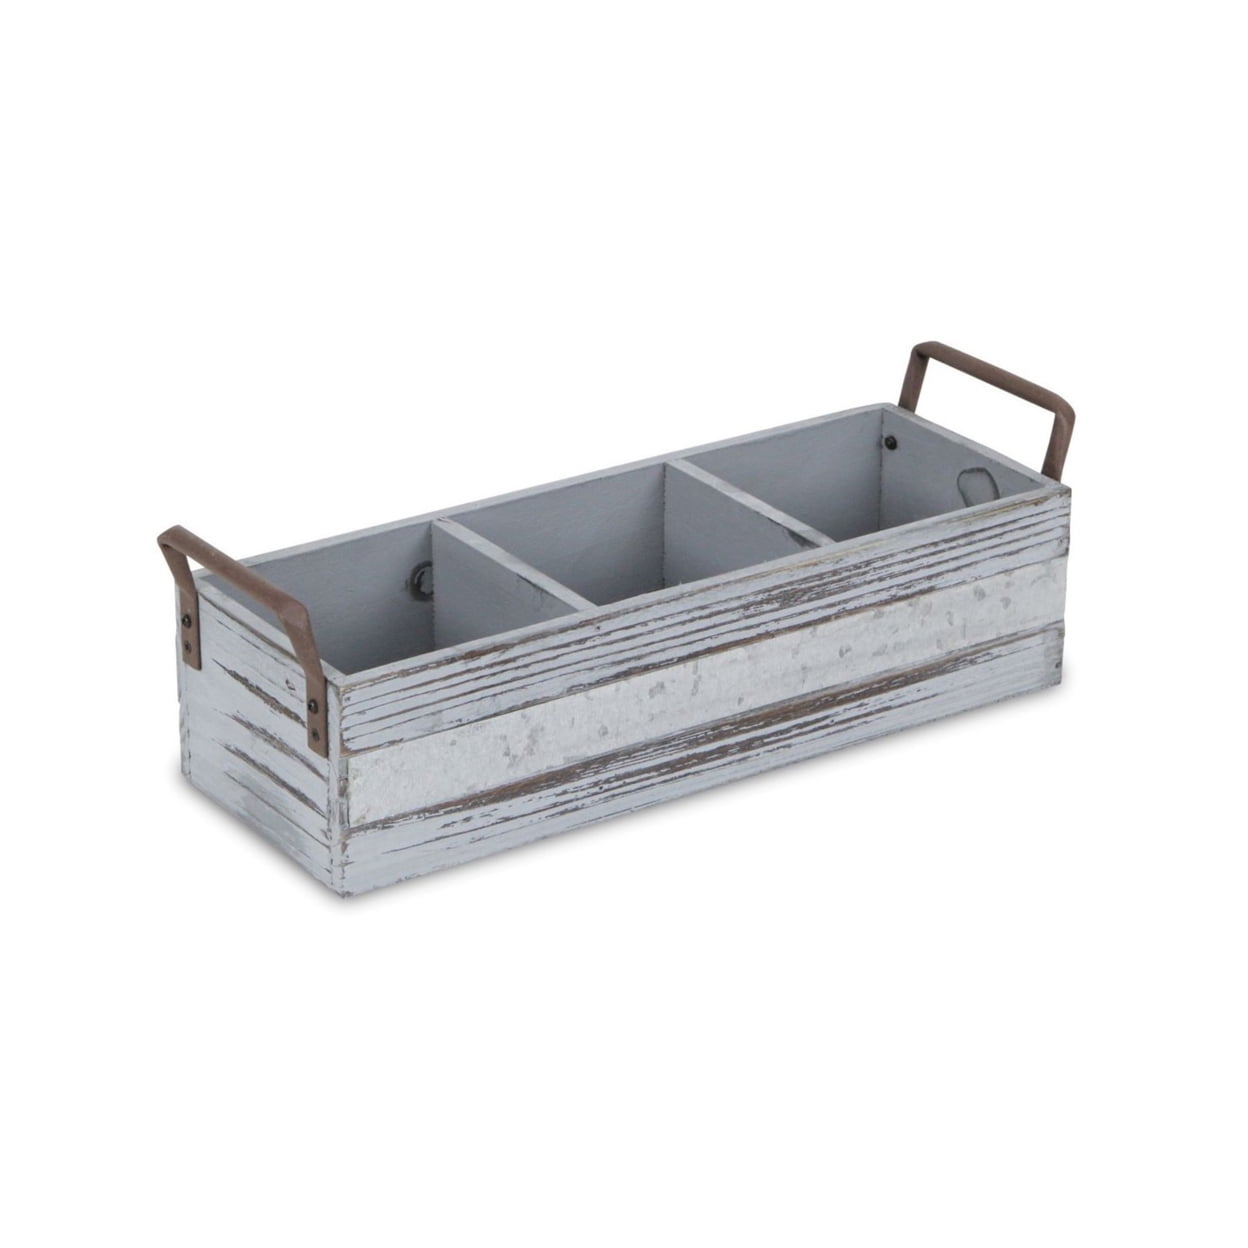 Picture of Cheungs FP-3878GW Gray Wash wooden 3 Slot Storage Caddy with Side Metal Handles & Center Galvanized Accent